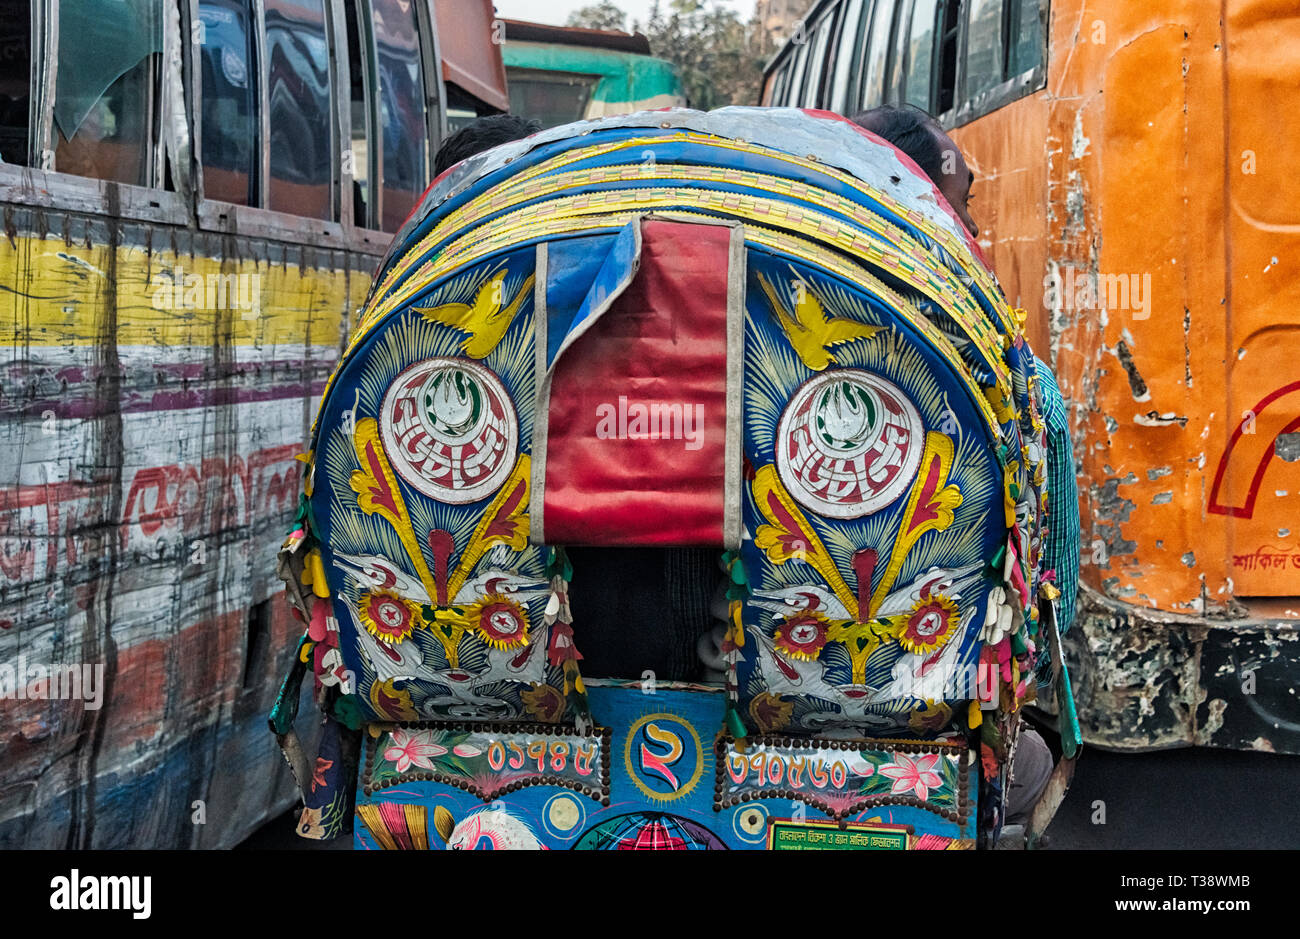 Colorful painted rickshaws and old scratched buses on the street, Dhaka, Bangladesh Stock Photo